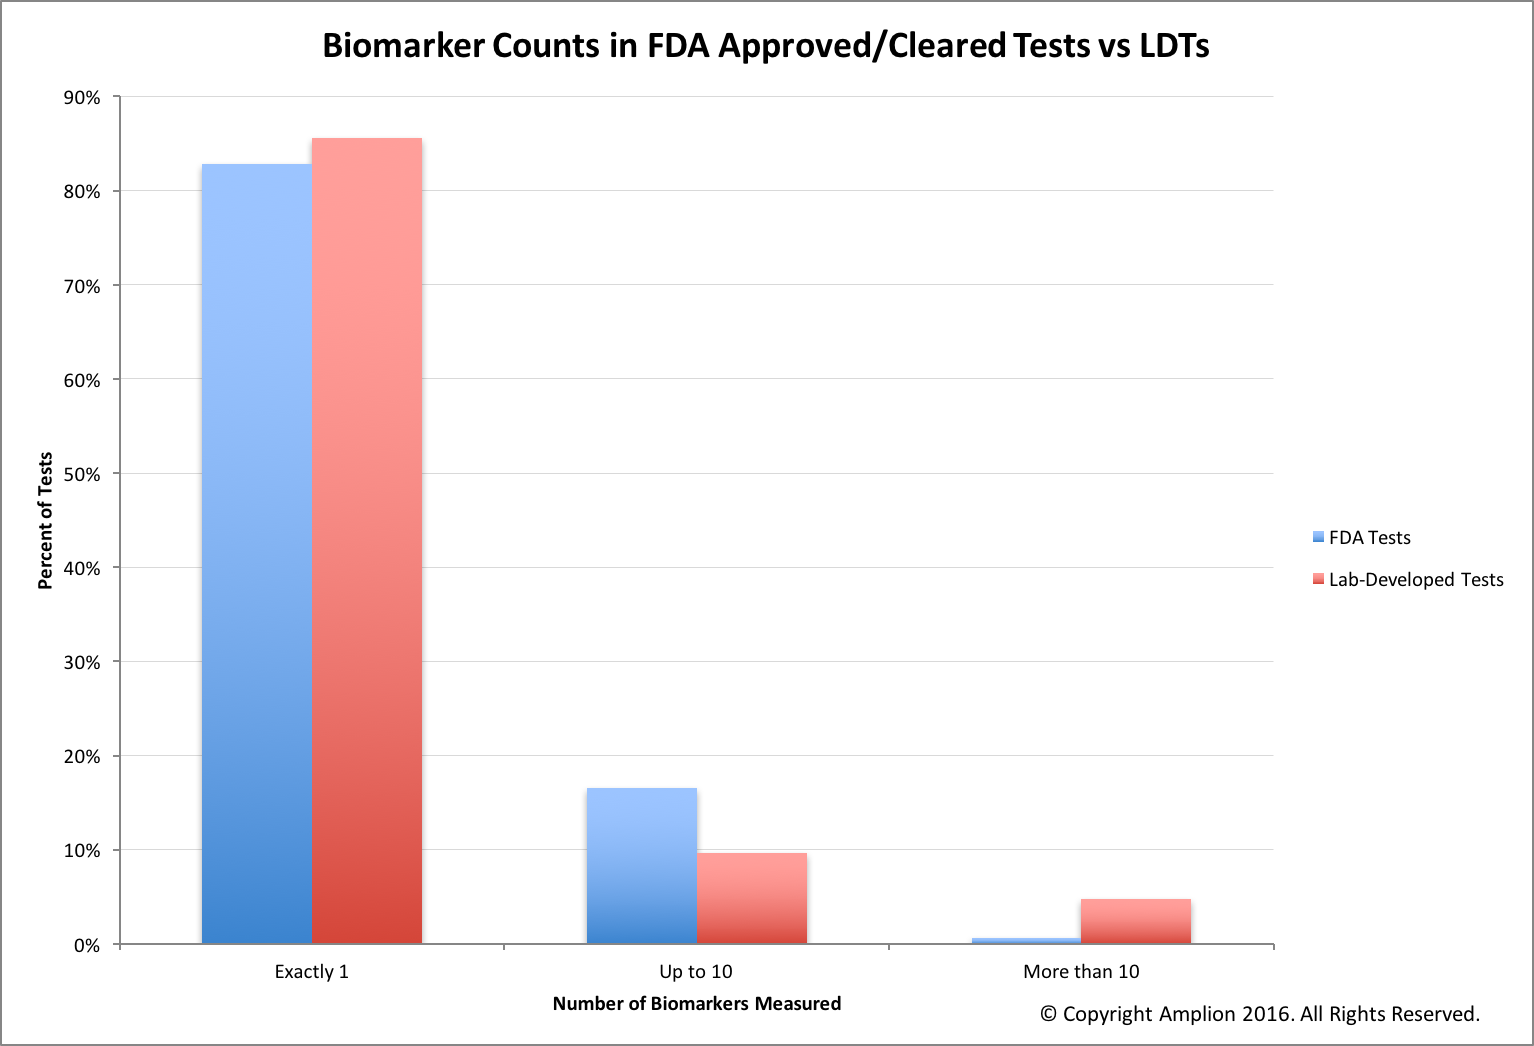 TestBiomarkerCounts-1.png